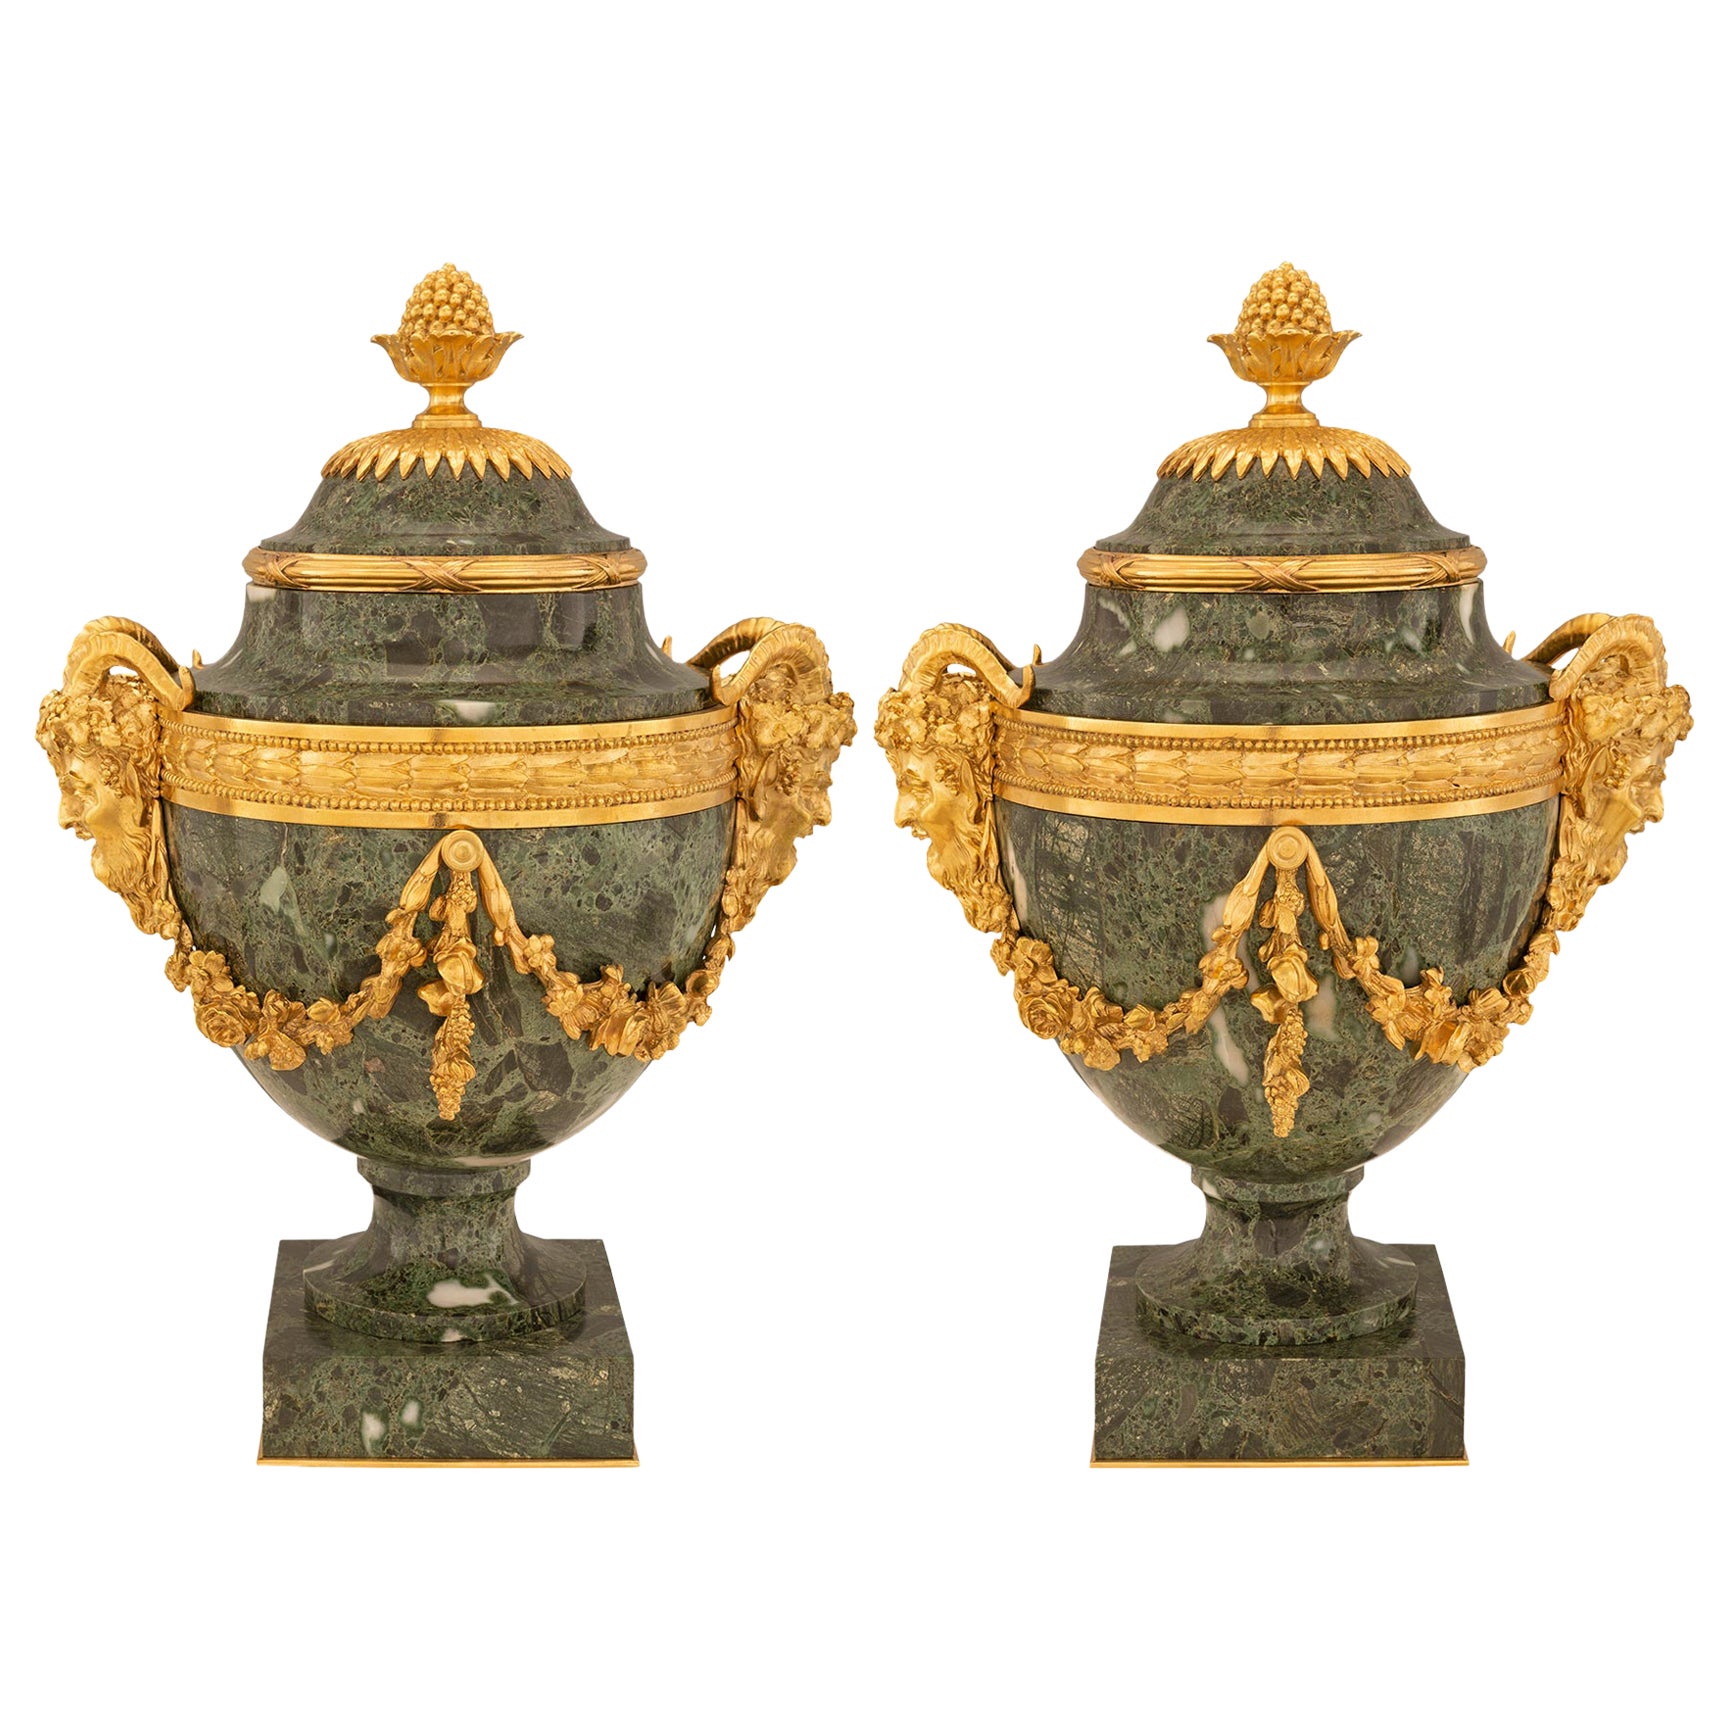 Pair of French 19th Century Belle Époque Period Marble and Ormolu Urns